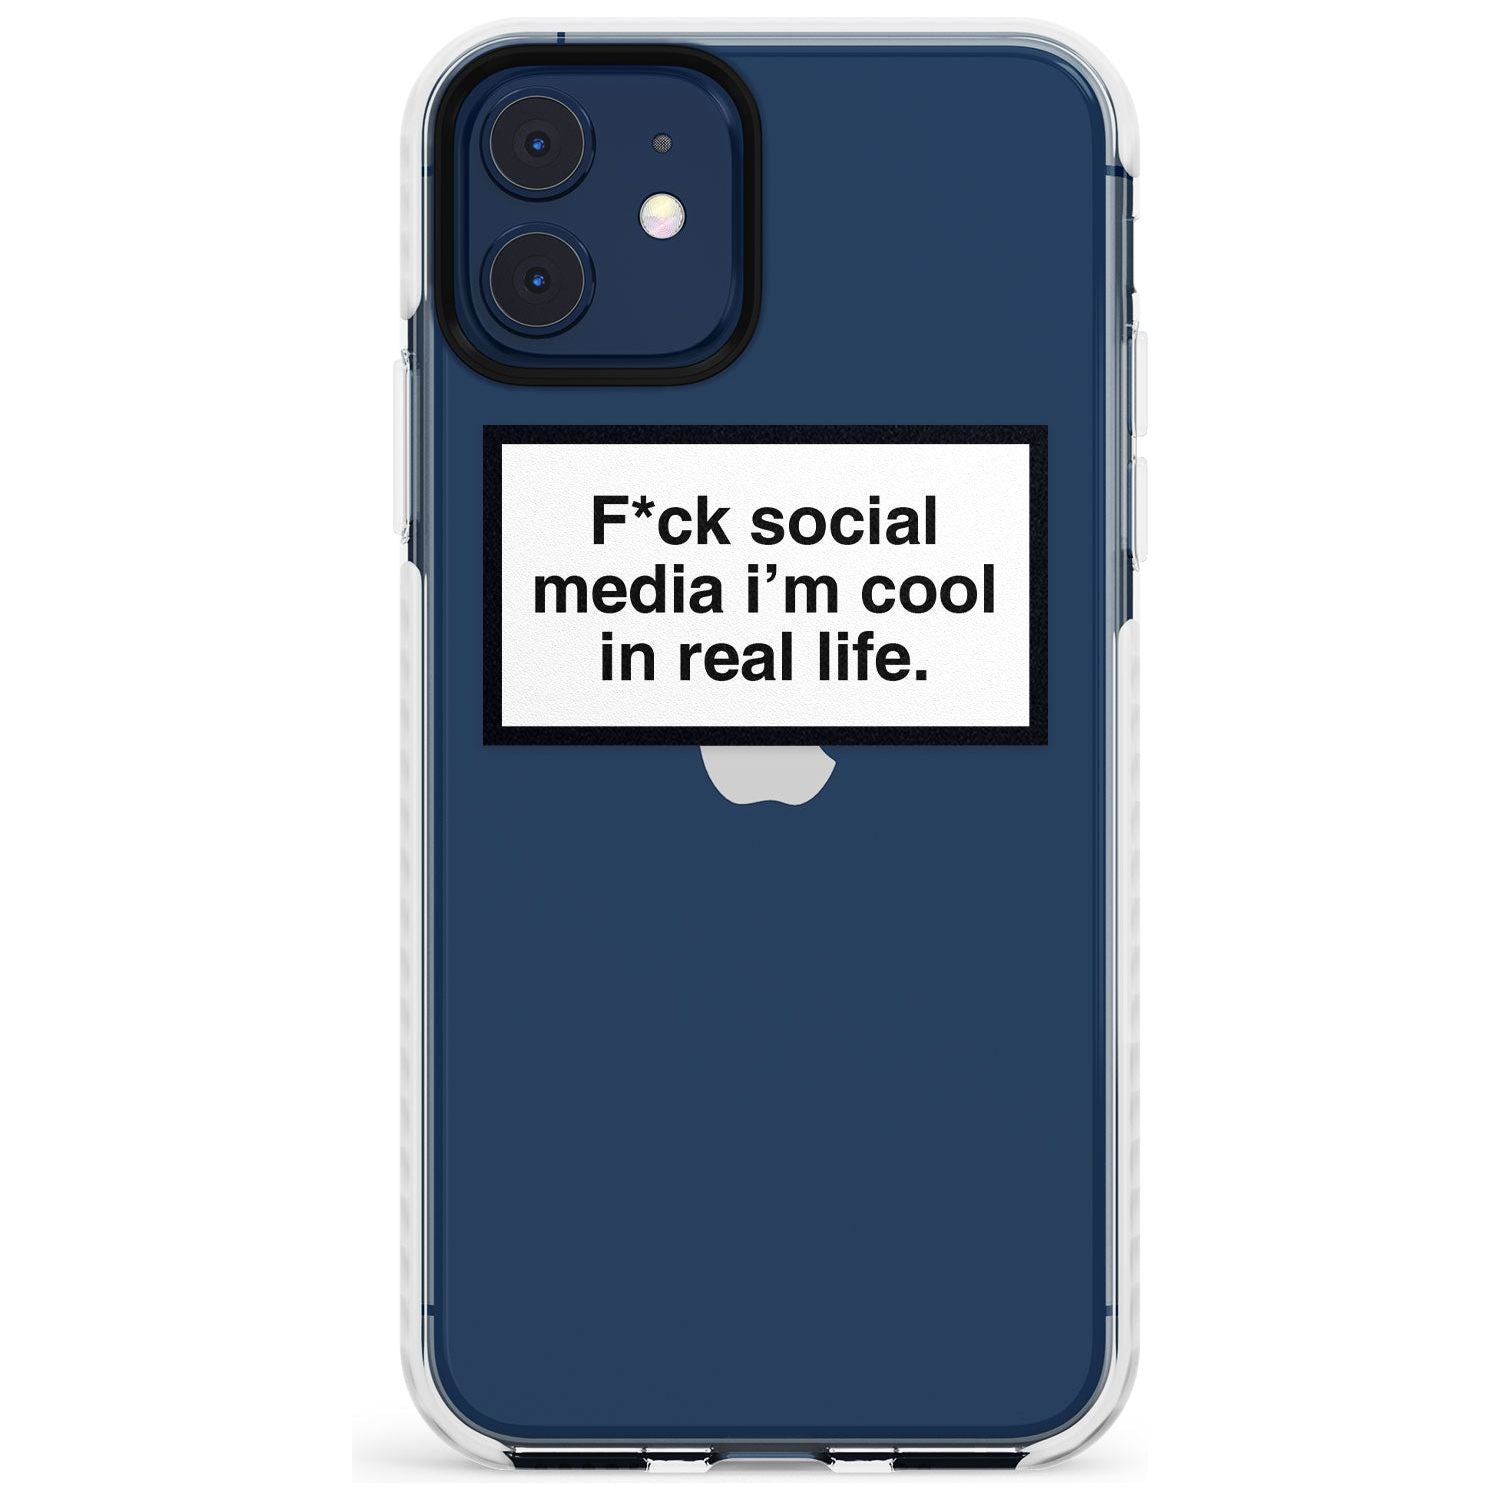 F*ck social media I'm cool in real life Slim TPU Phone Case for iPhone 11